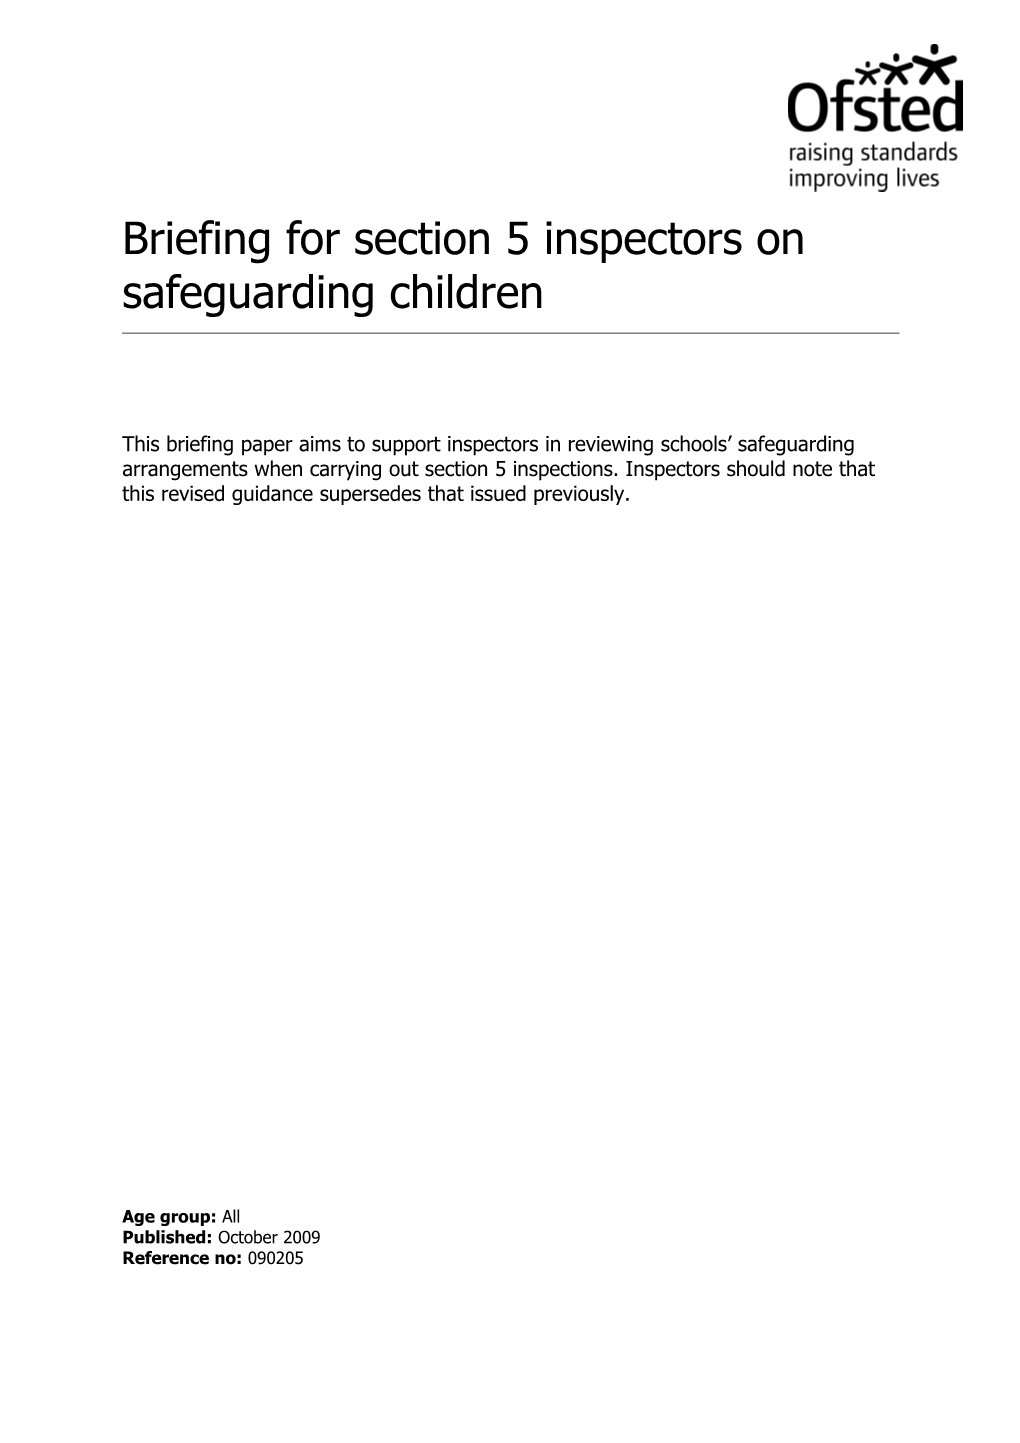 Briefing for Section 5 Inspectors on Safeguarding Children